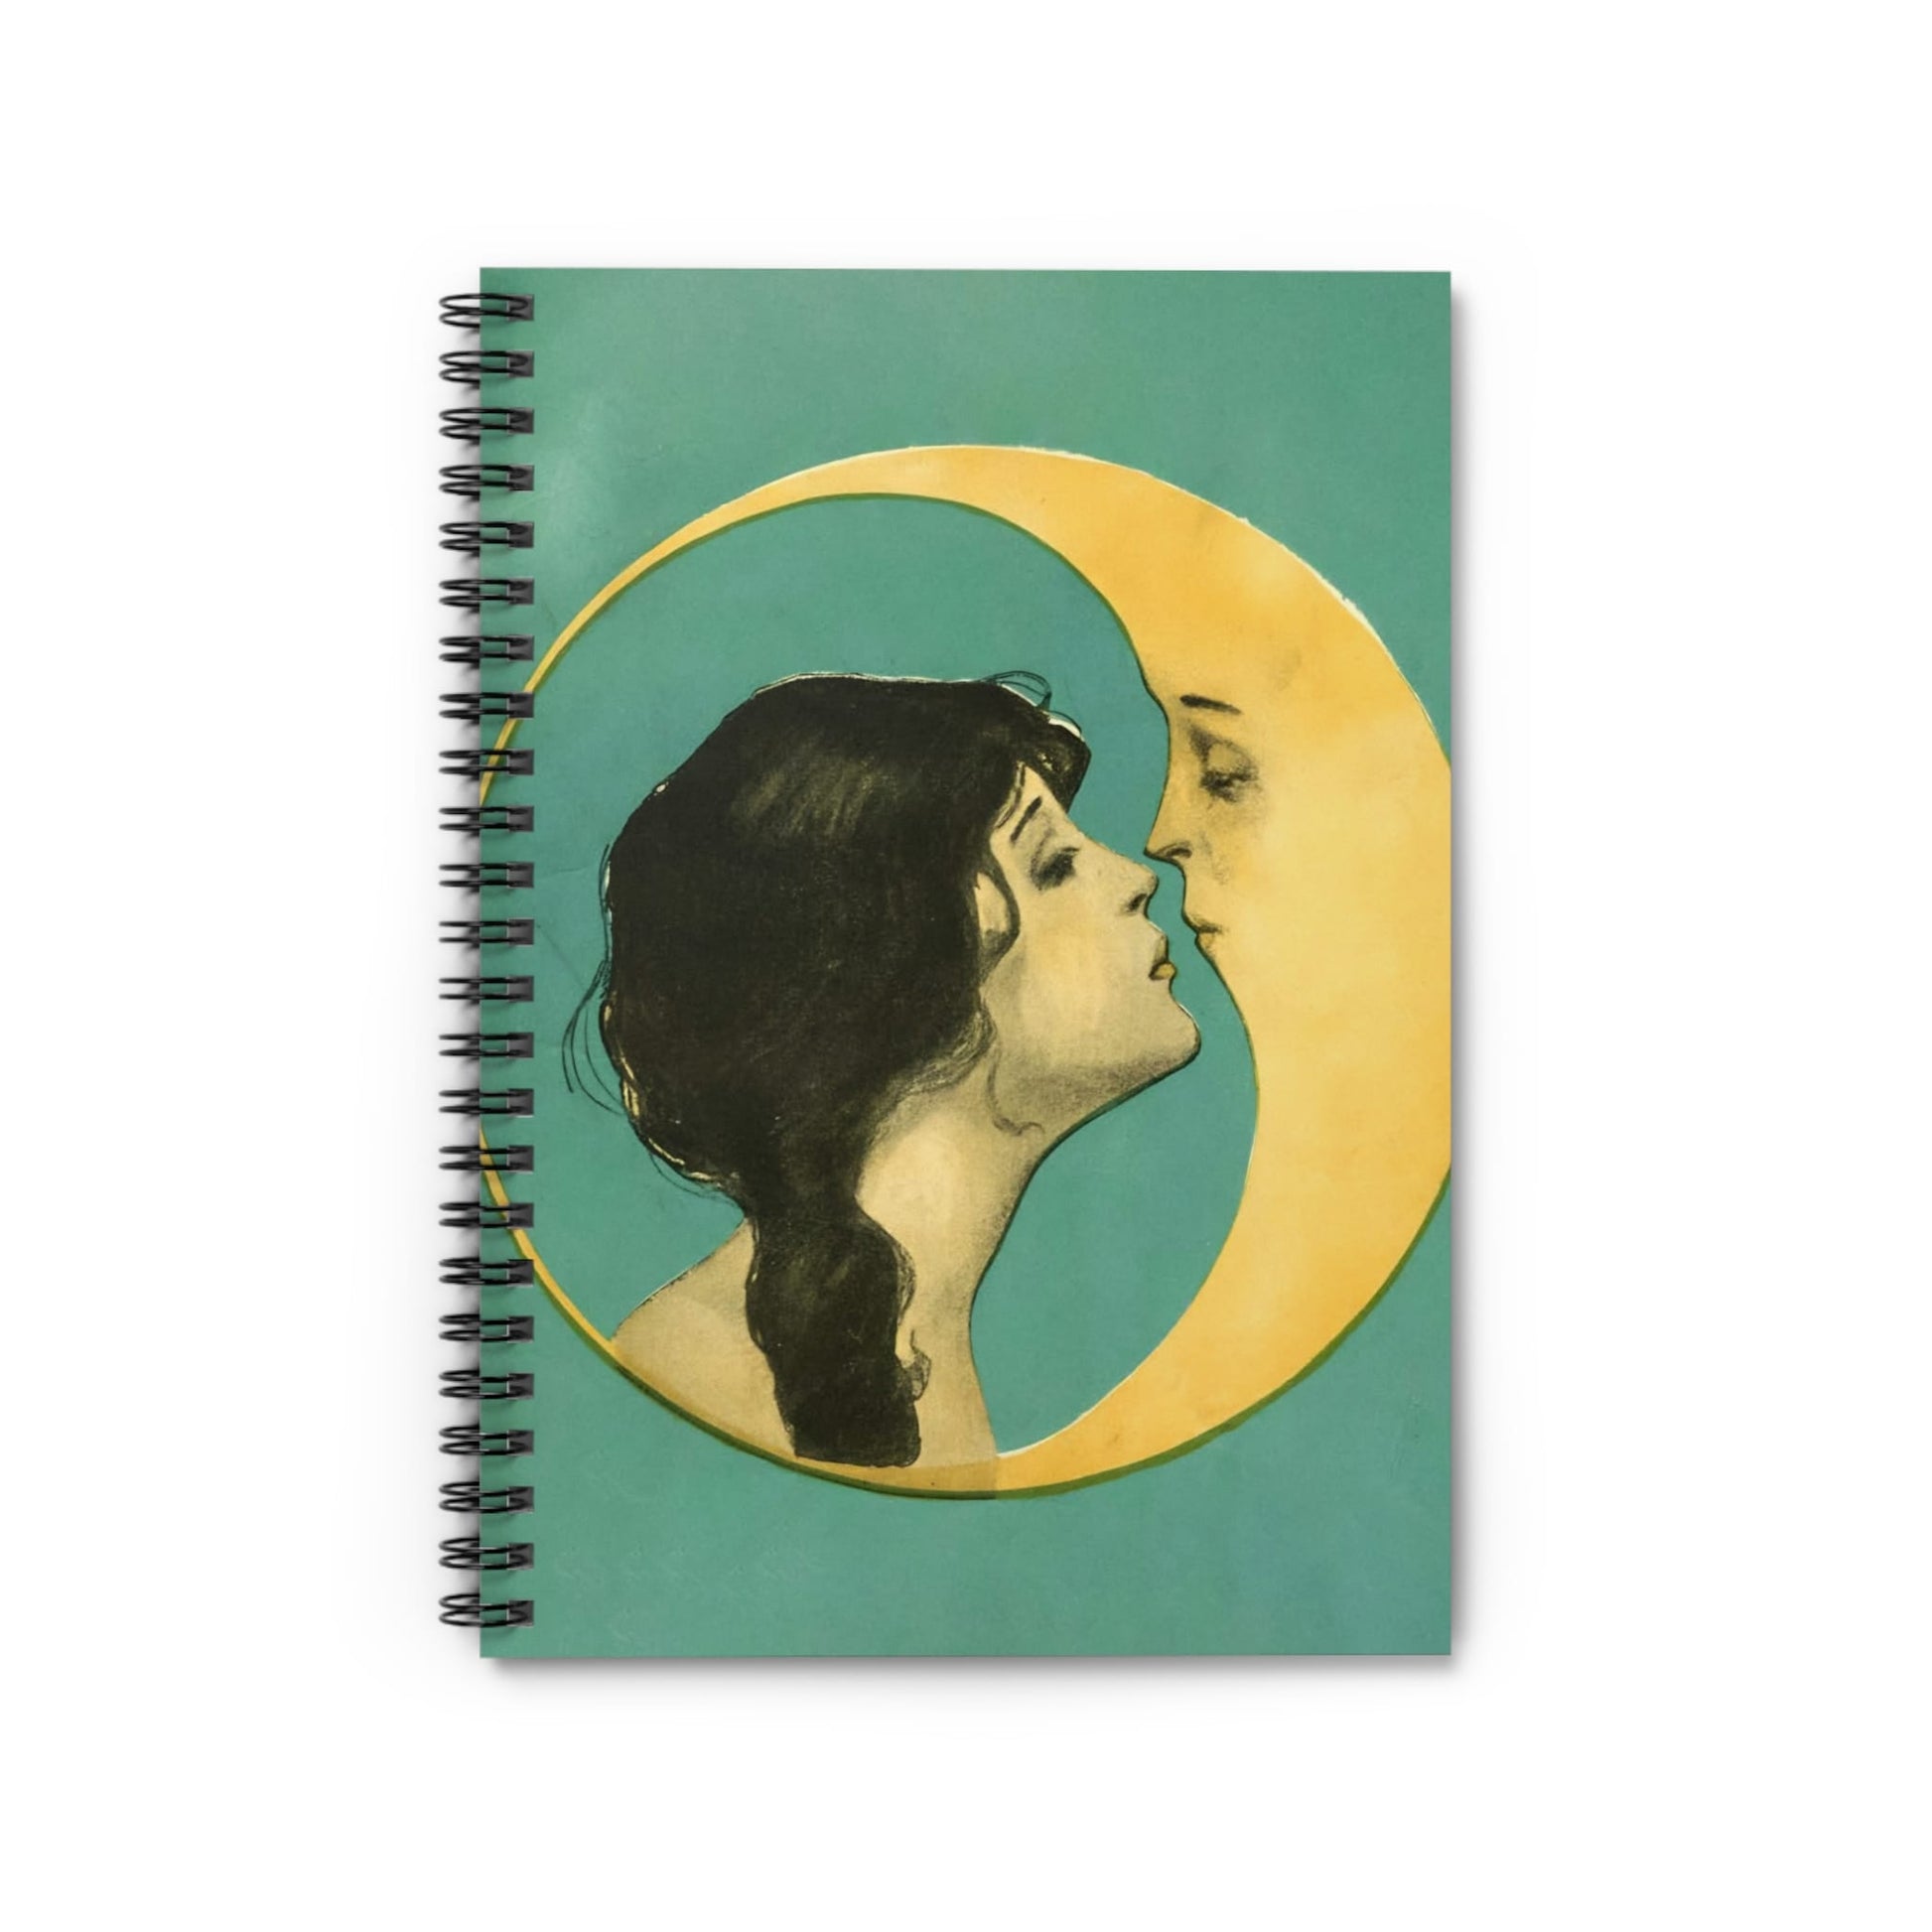 Woman Kissing the Moon Notebook with art nouveau cover, ideal for journals and planners, showcasing romantic art nouveau designs.